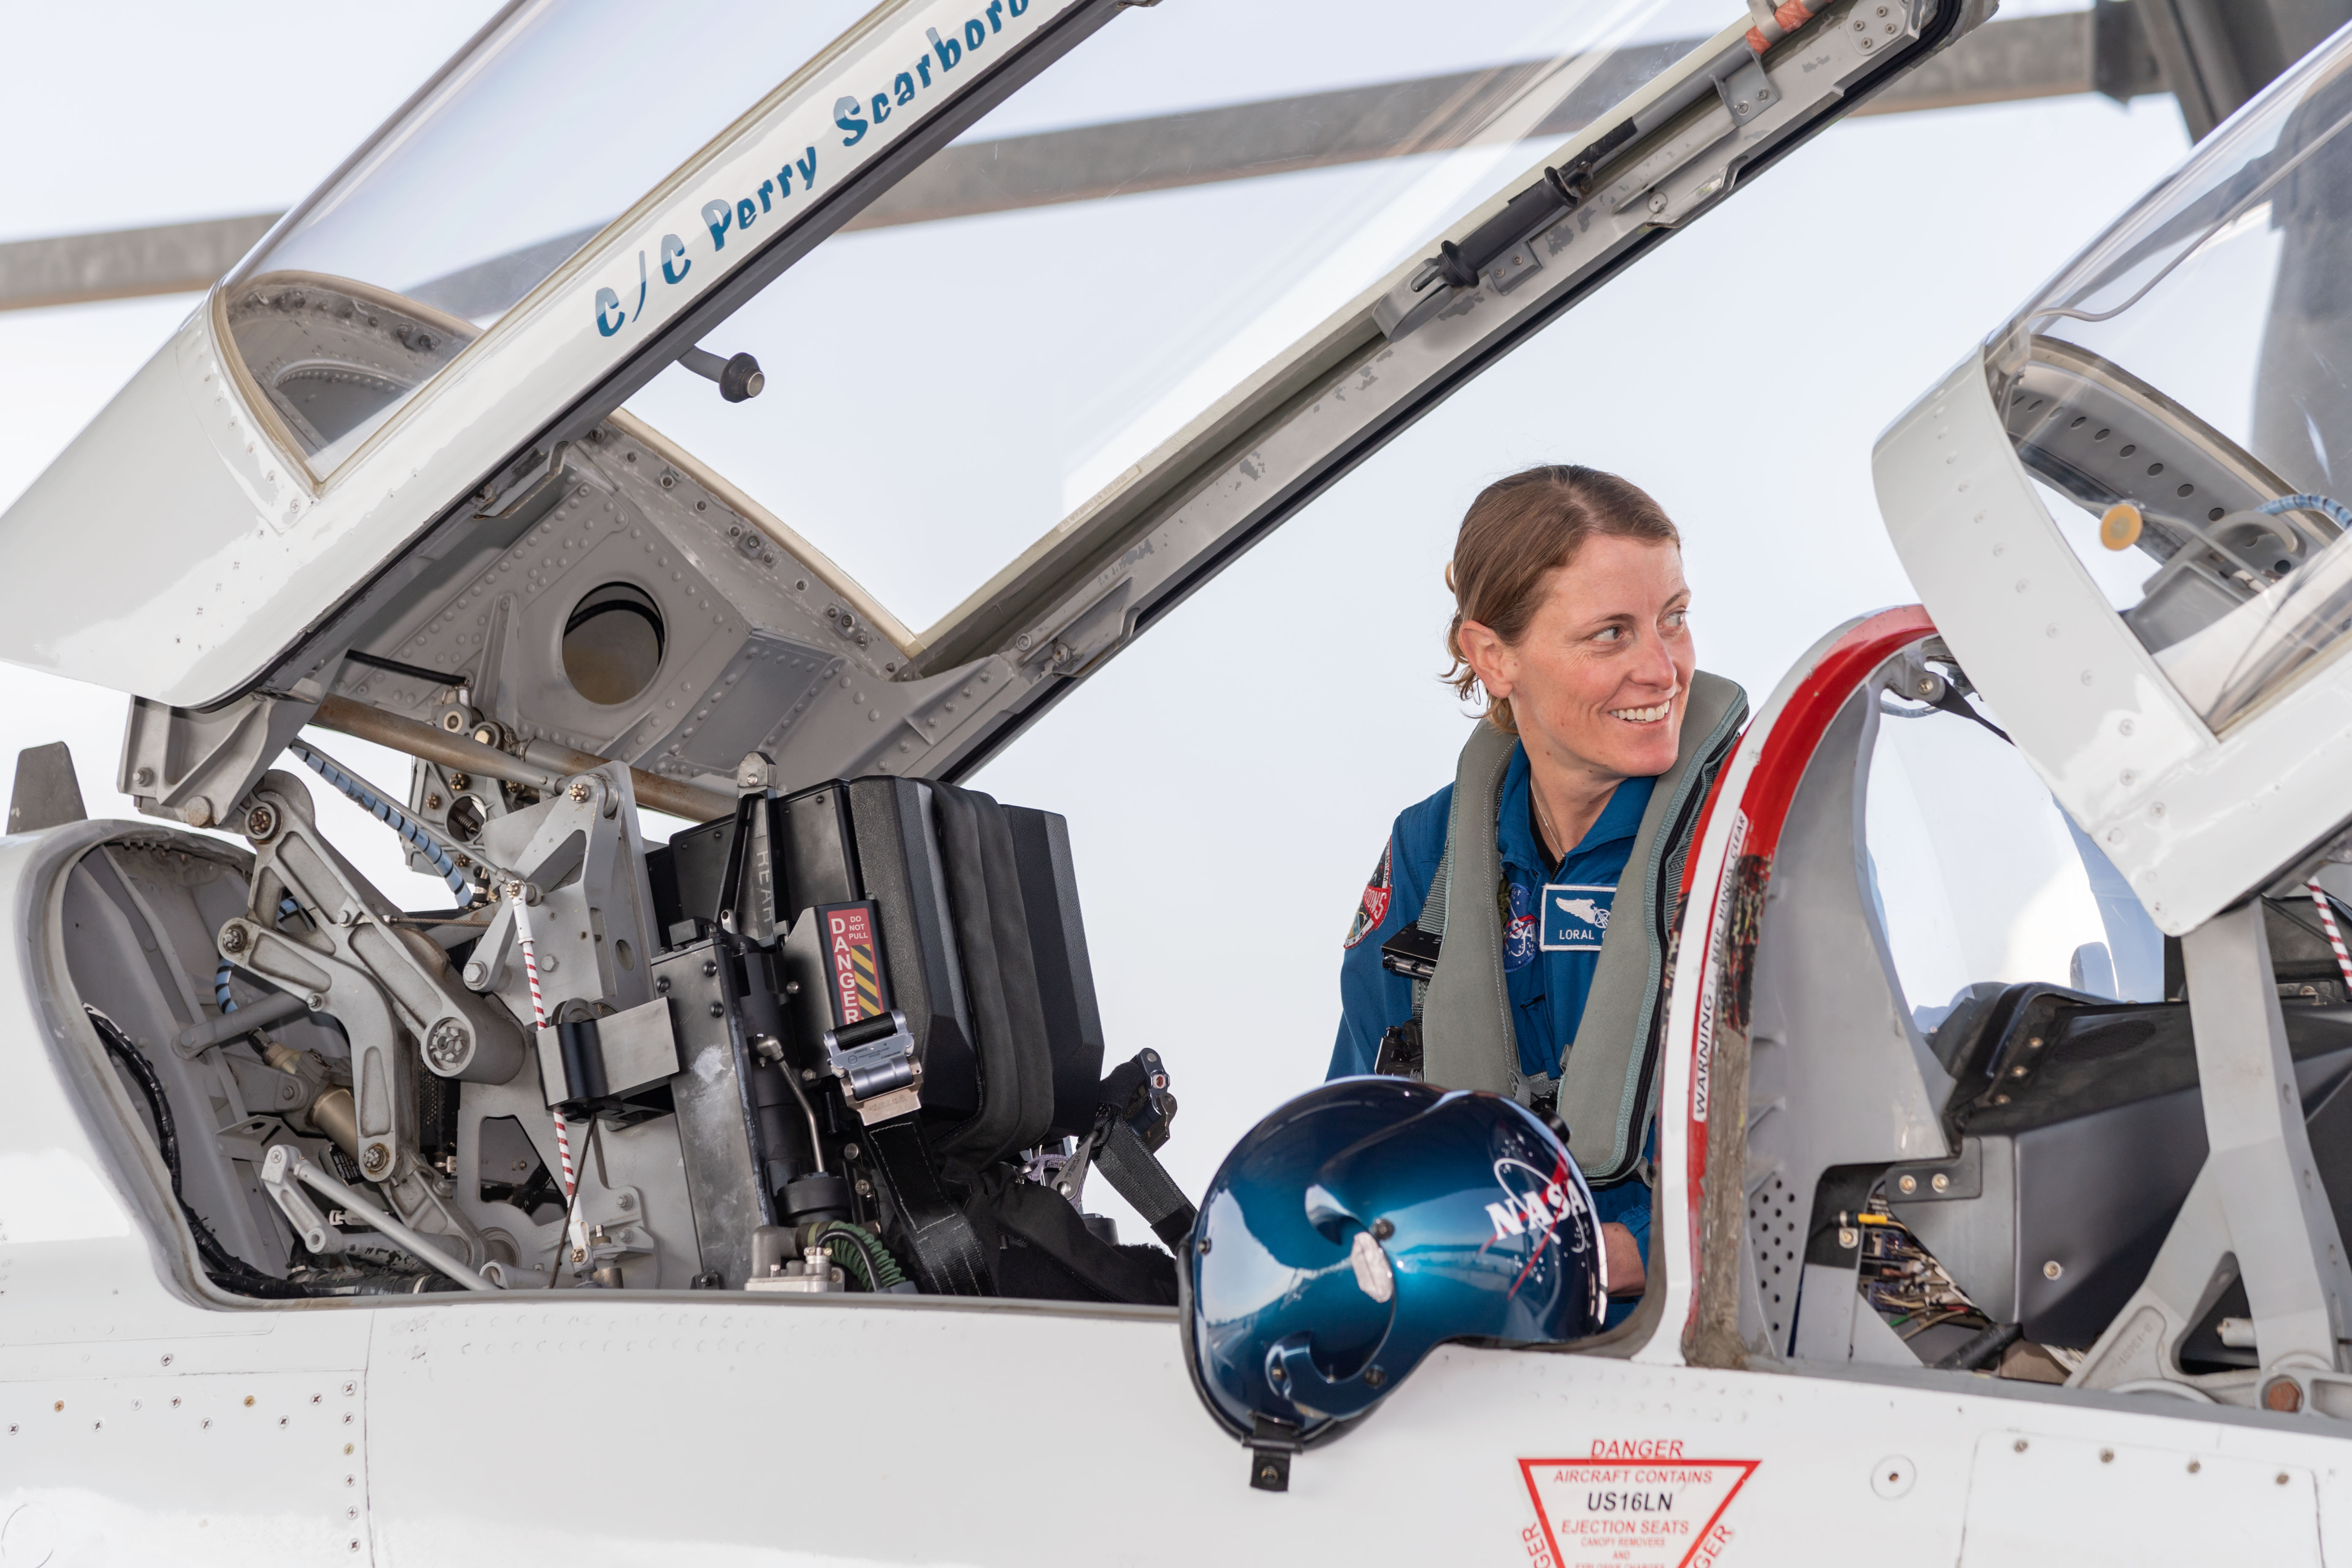 Astronaut Loral O’Hara boards a T-38 trainer jet